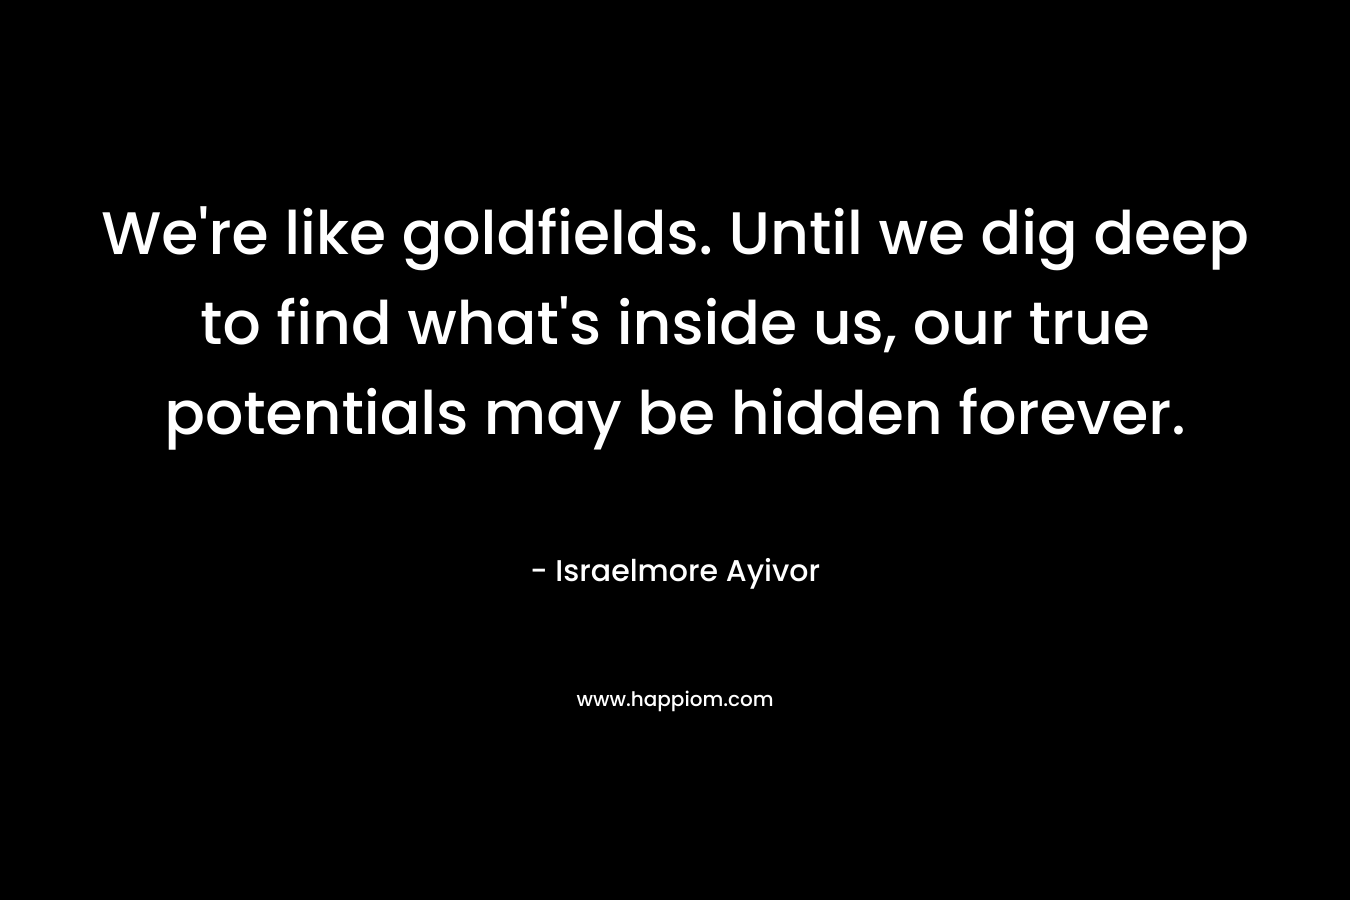 We're like goldfields. Until we dig deep to find what's inside us, our true potentials may be hidden forever.